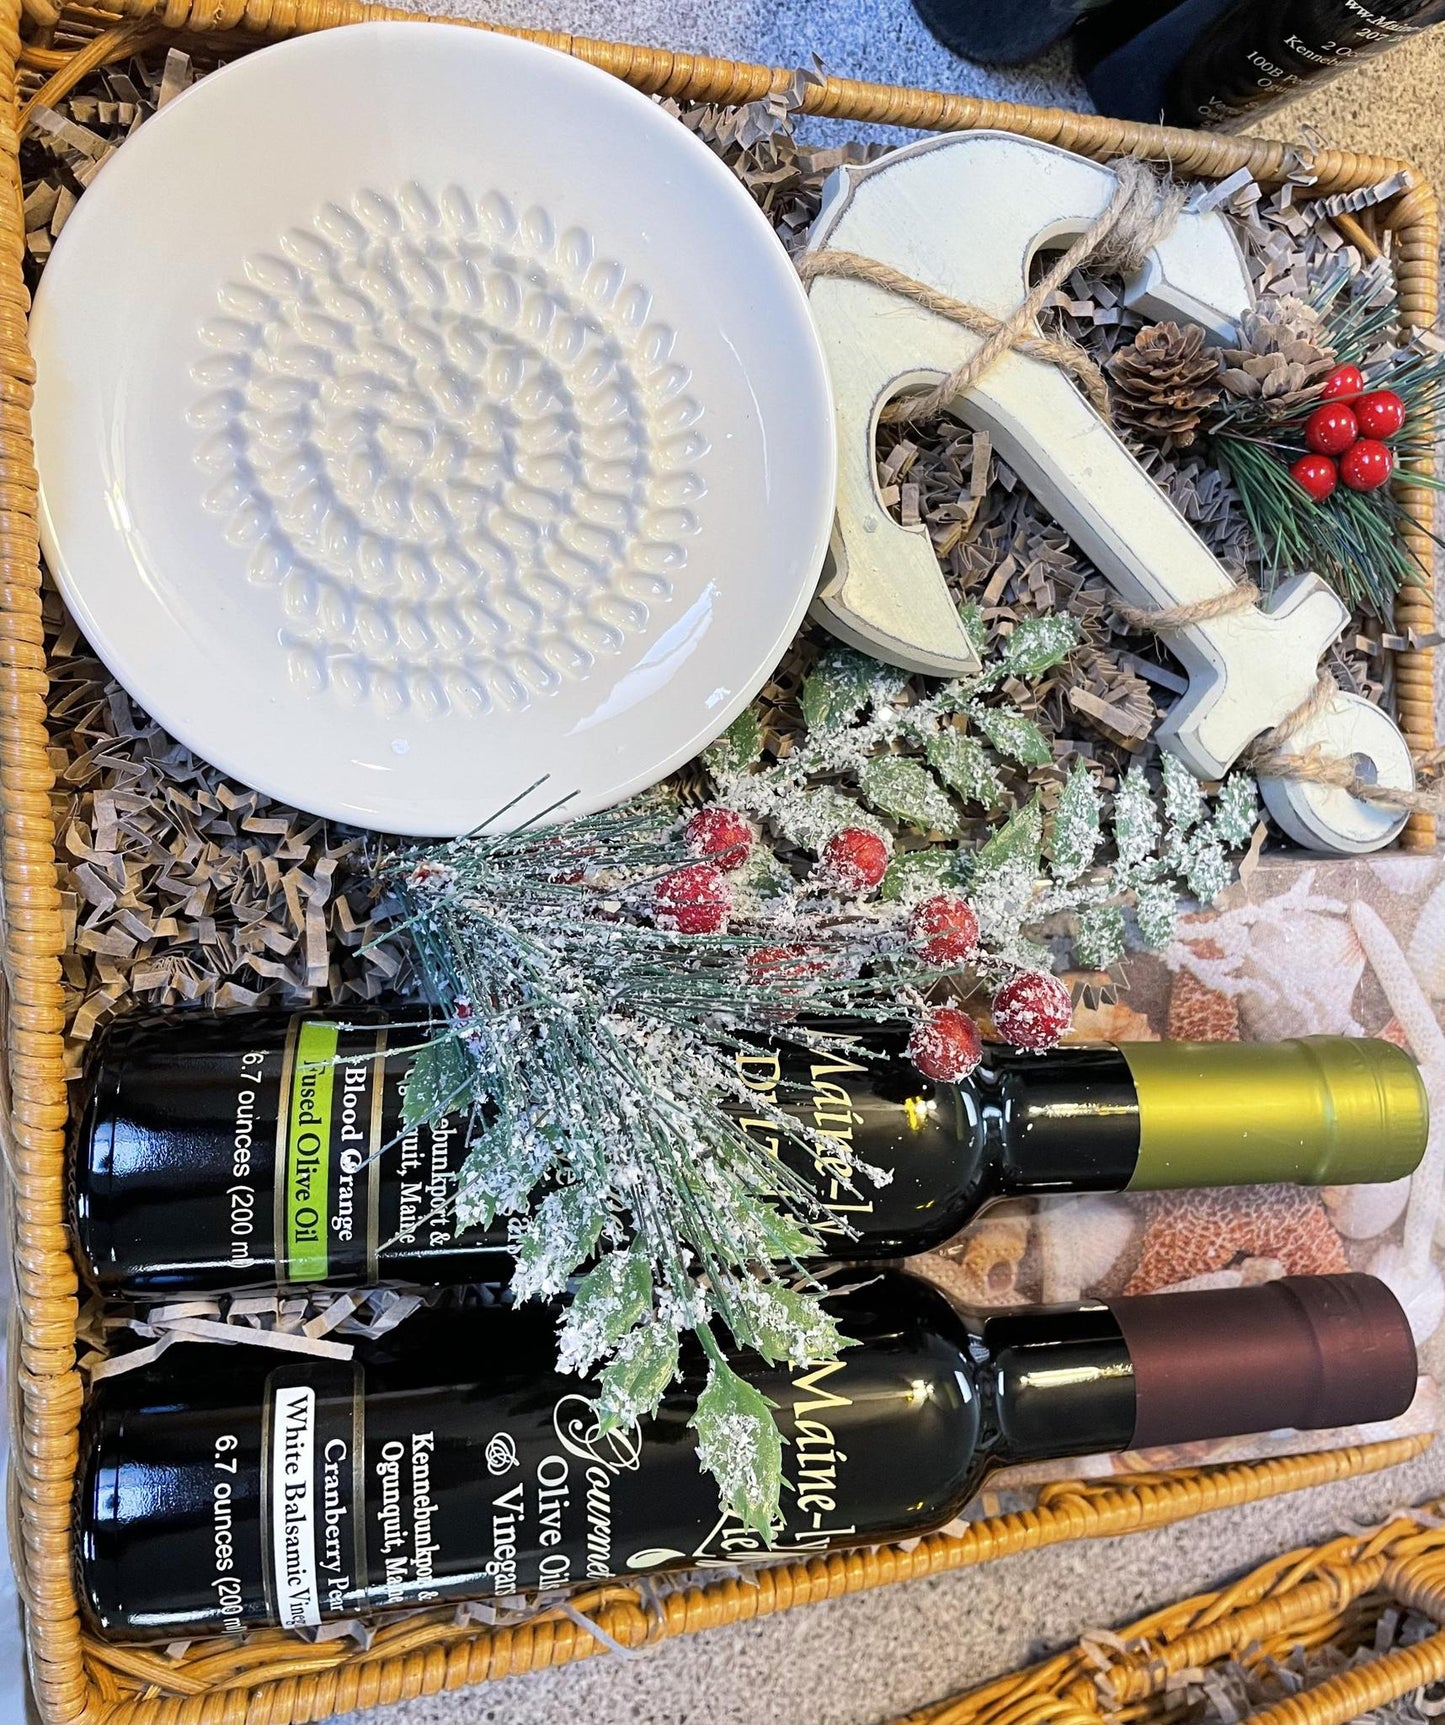 Ms Claus Nautical Themed Basket with Garlic Grating